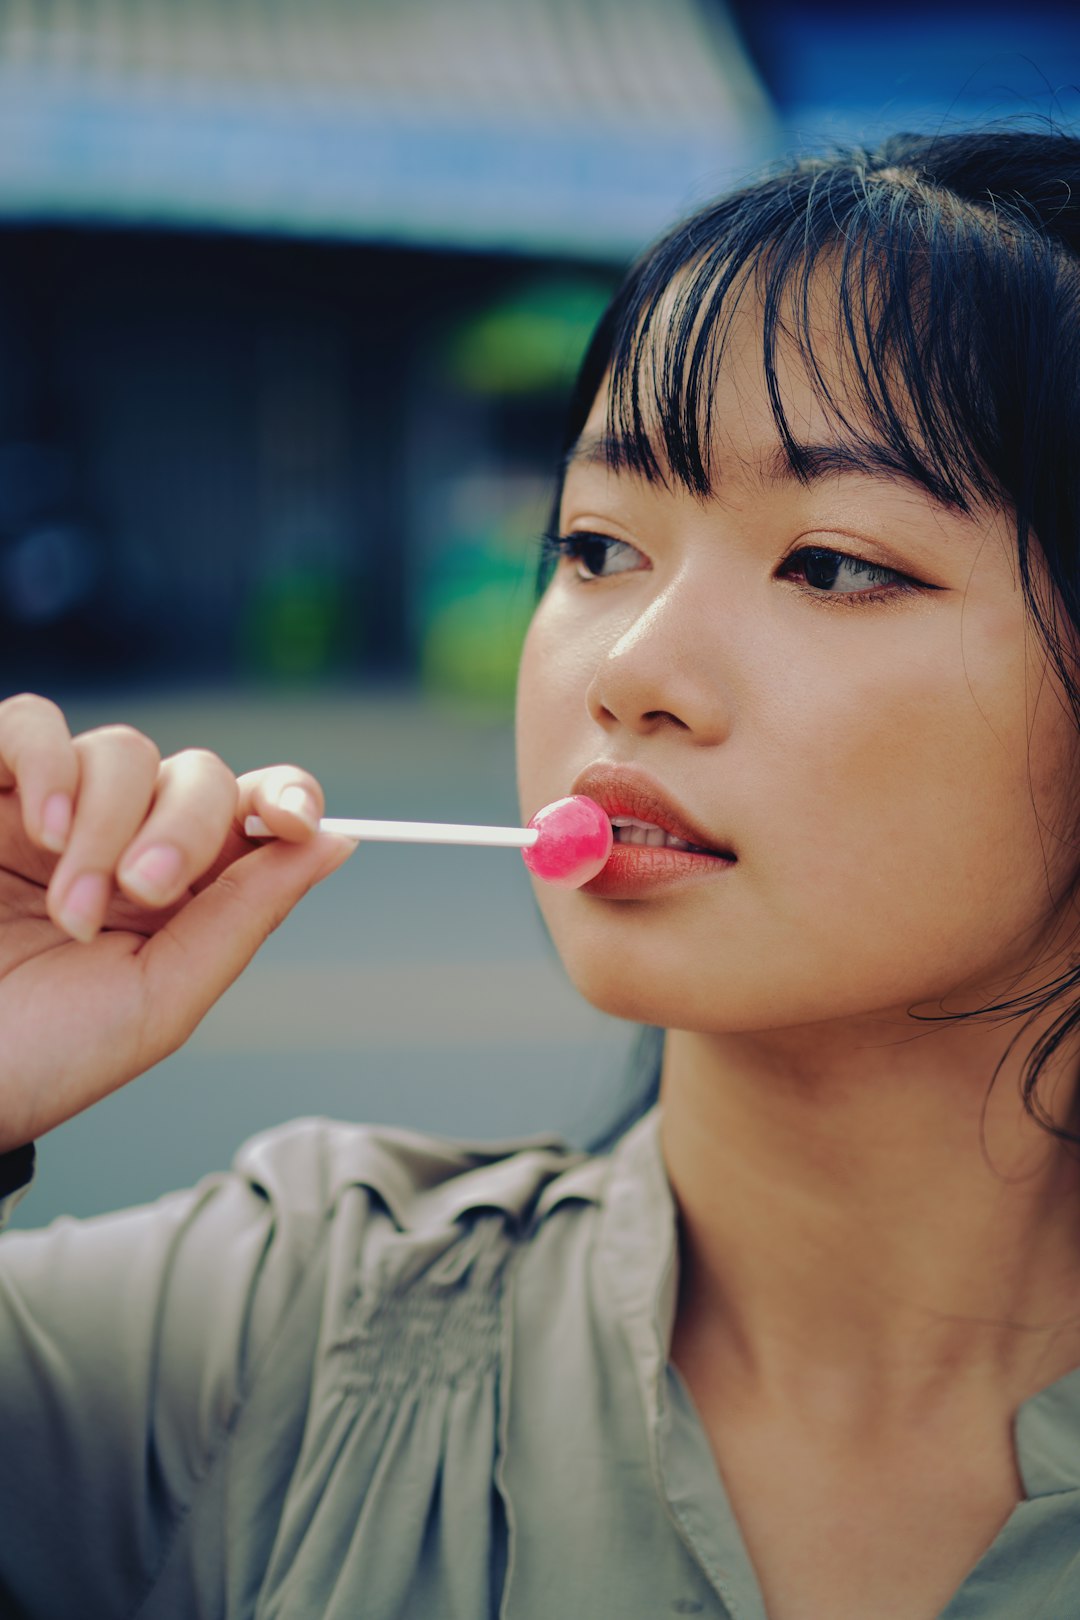 woman in gray shirt holding pink lollipop